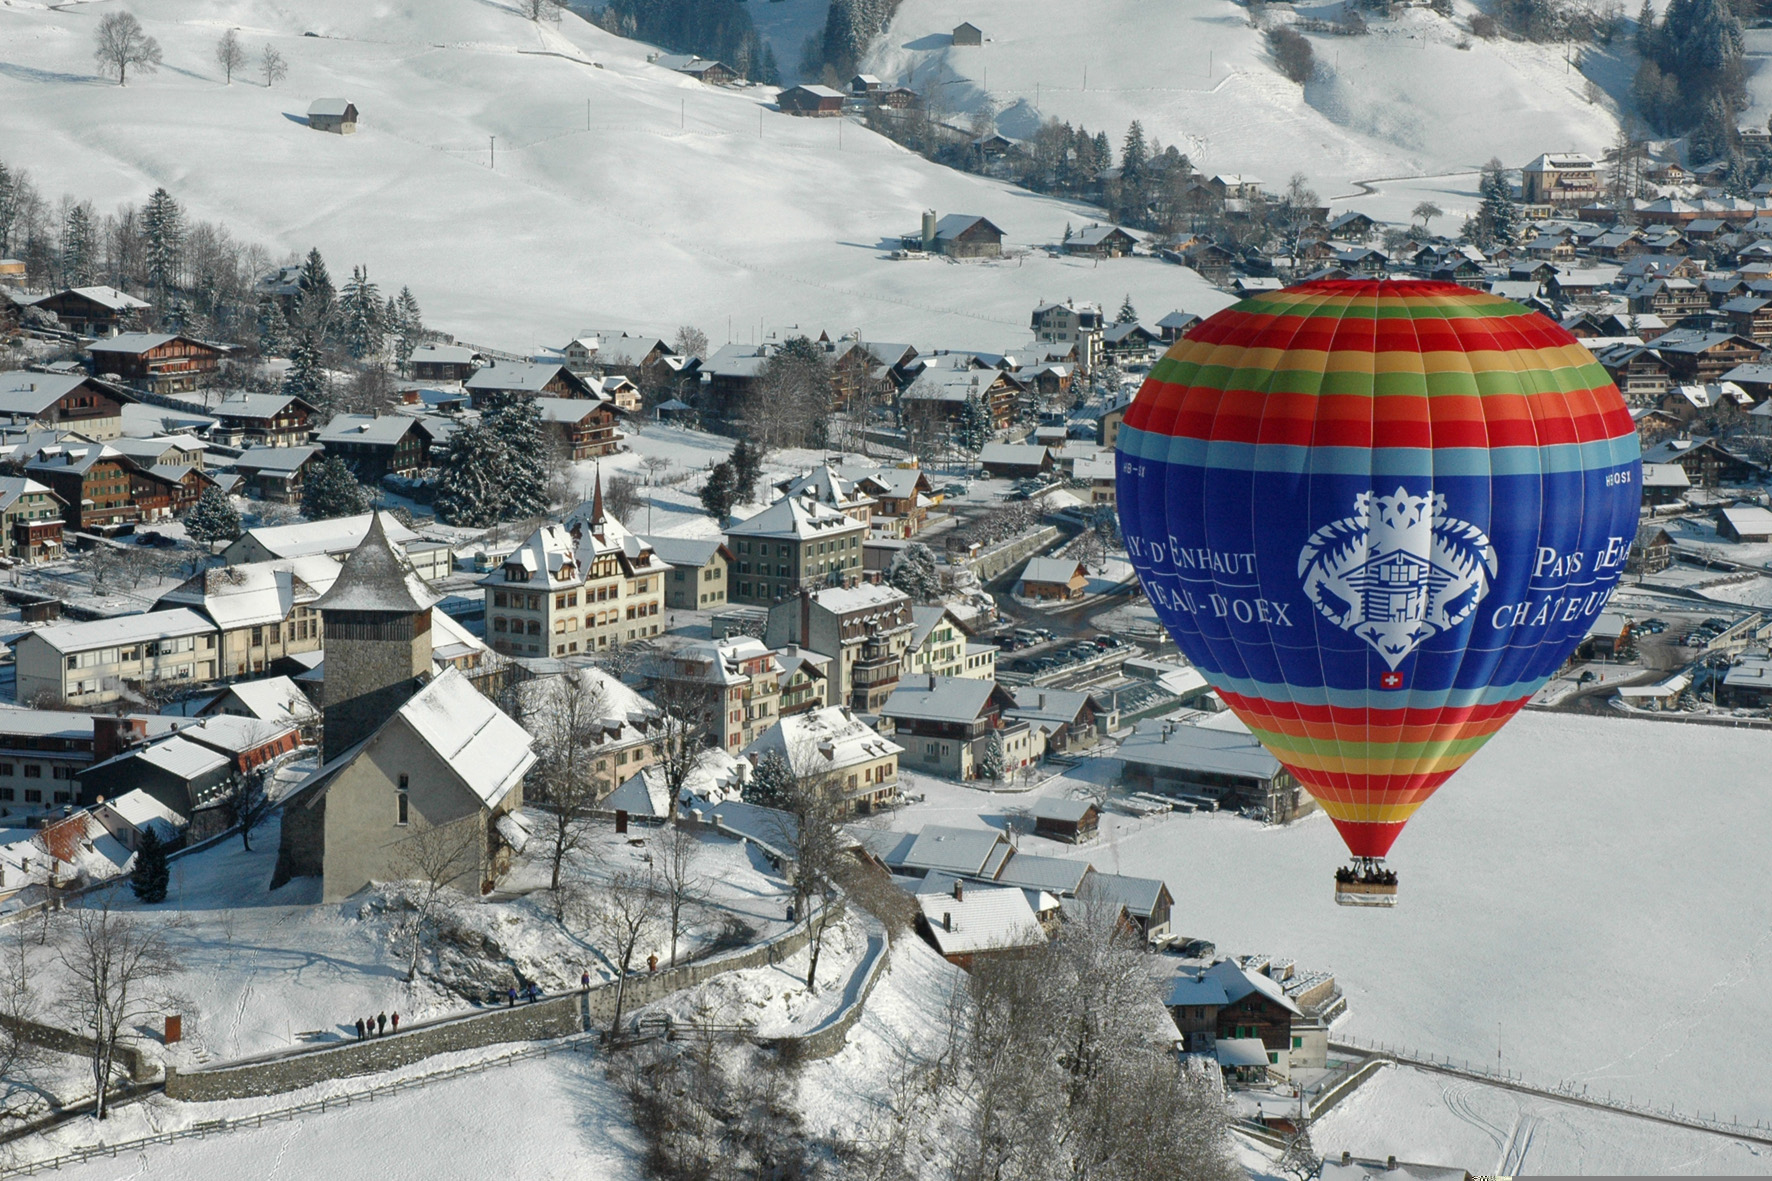 Balloons over Chateau DOex 31FIB photo 004 c FABRICE WAGNER